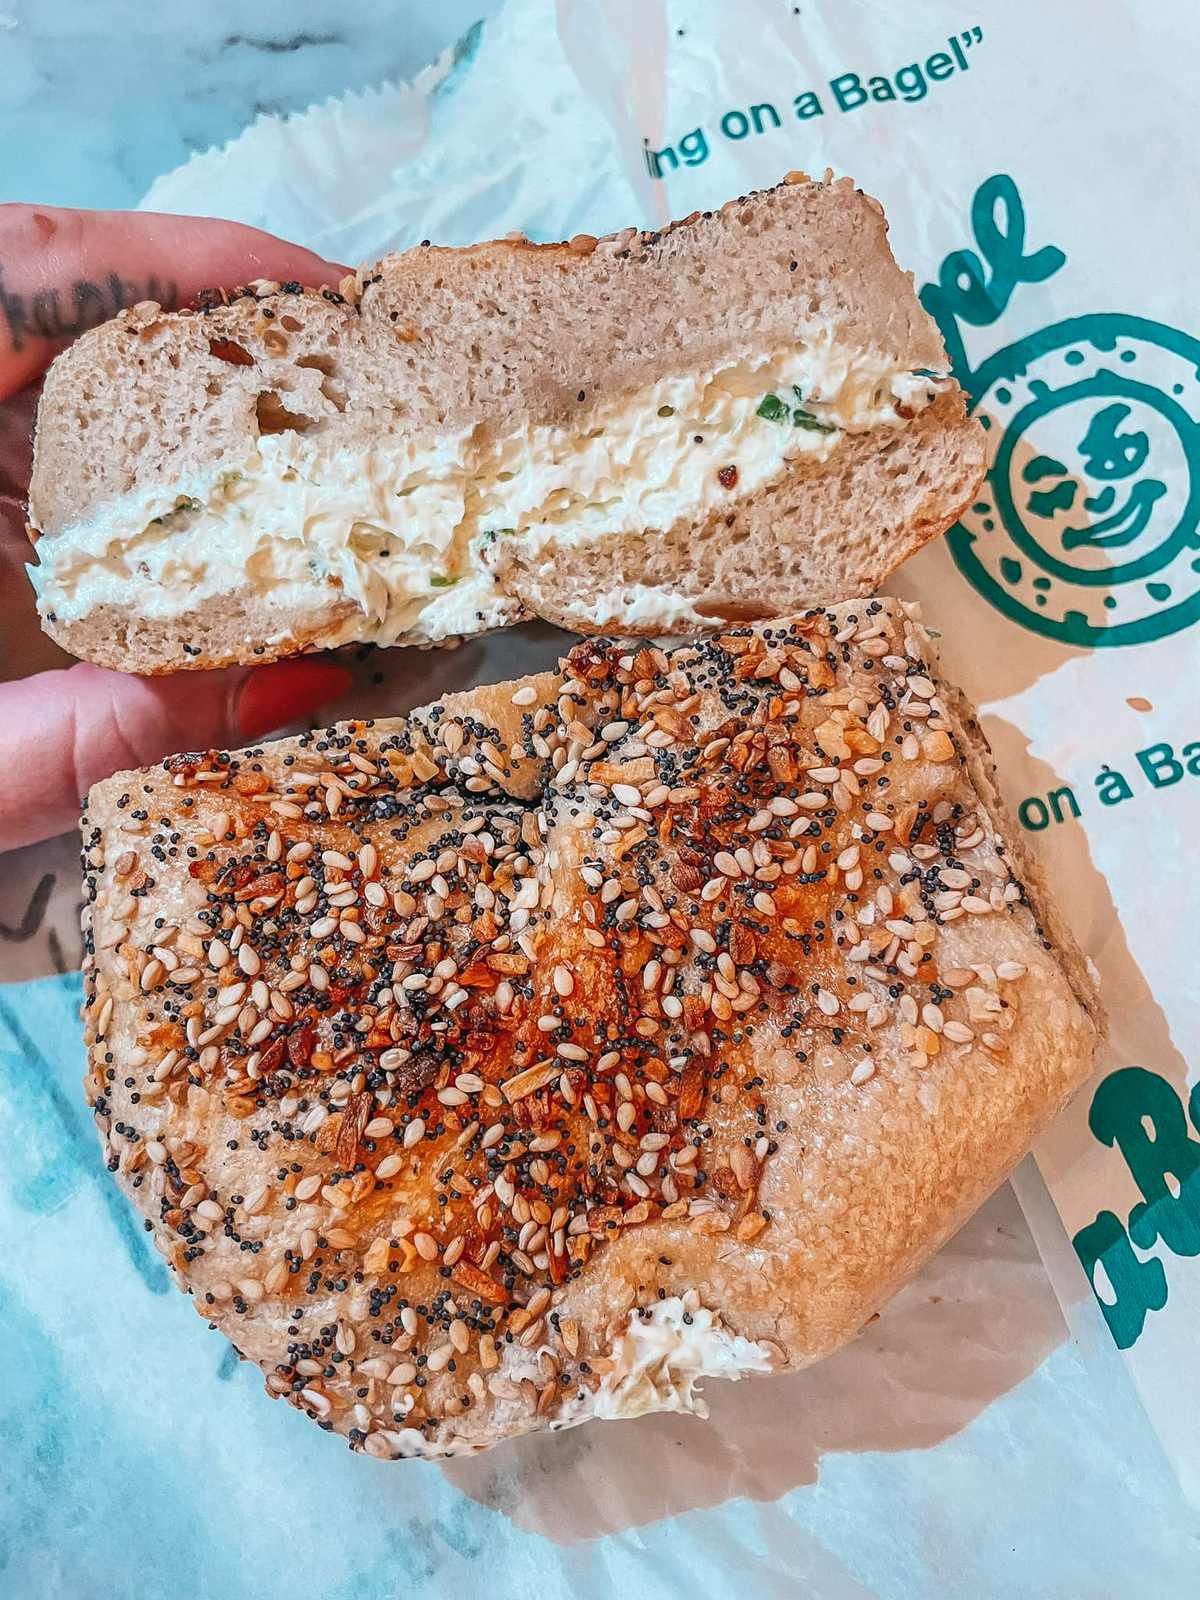 Everything bagel with scallion cream cheese from Ess-a-Bagel